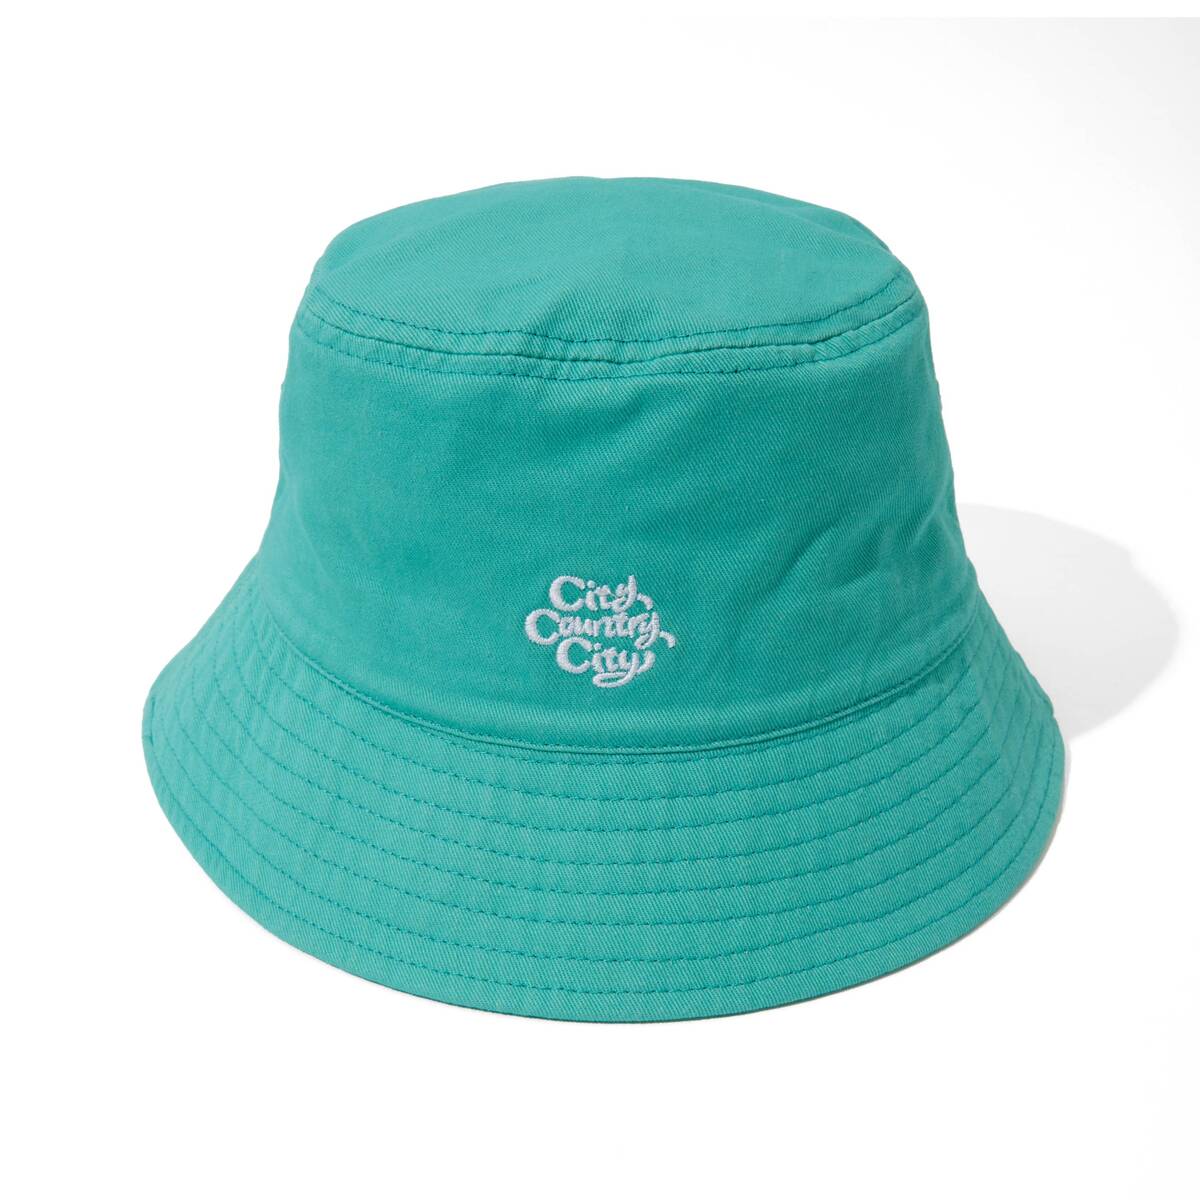 CITY COUNTRY CITY Embroidered Logo Washed Cotton Hat -blue green - 画像2枚目